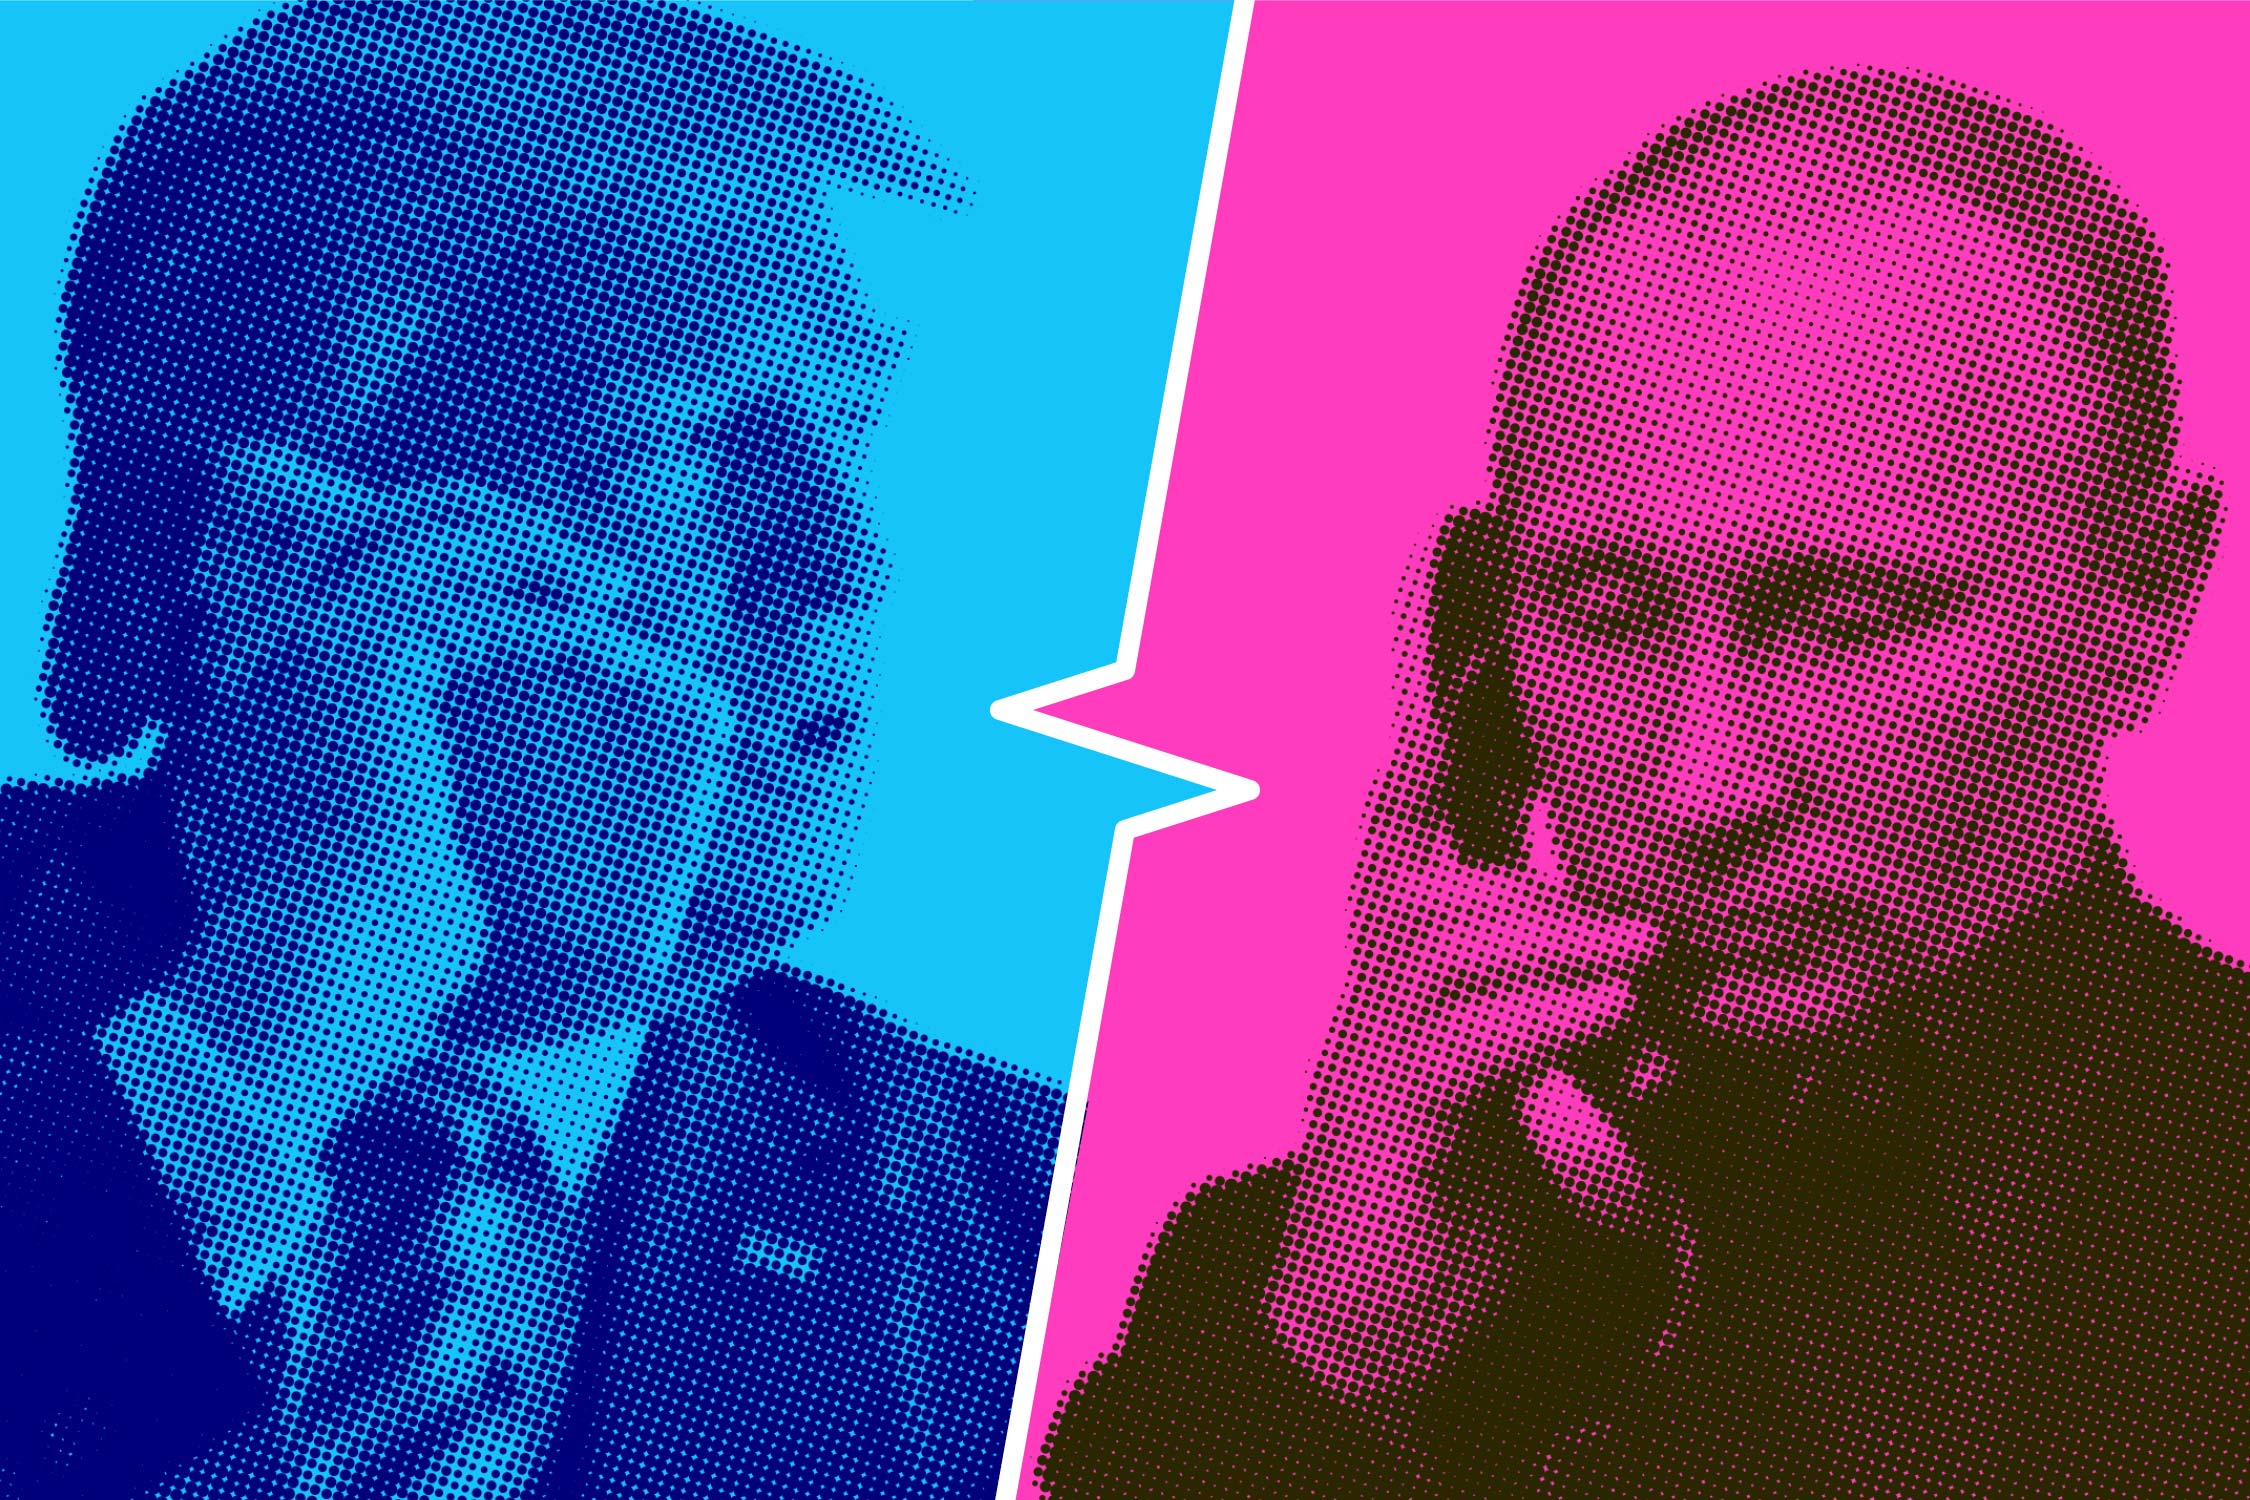 Did Putin influence Trump’s plan to withdraw from Syria?